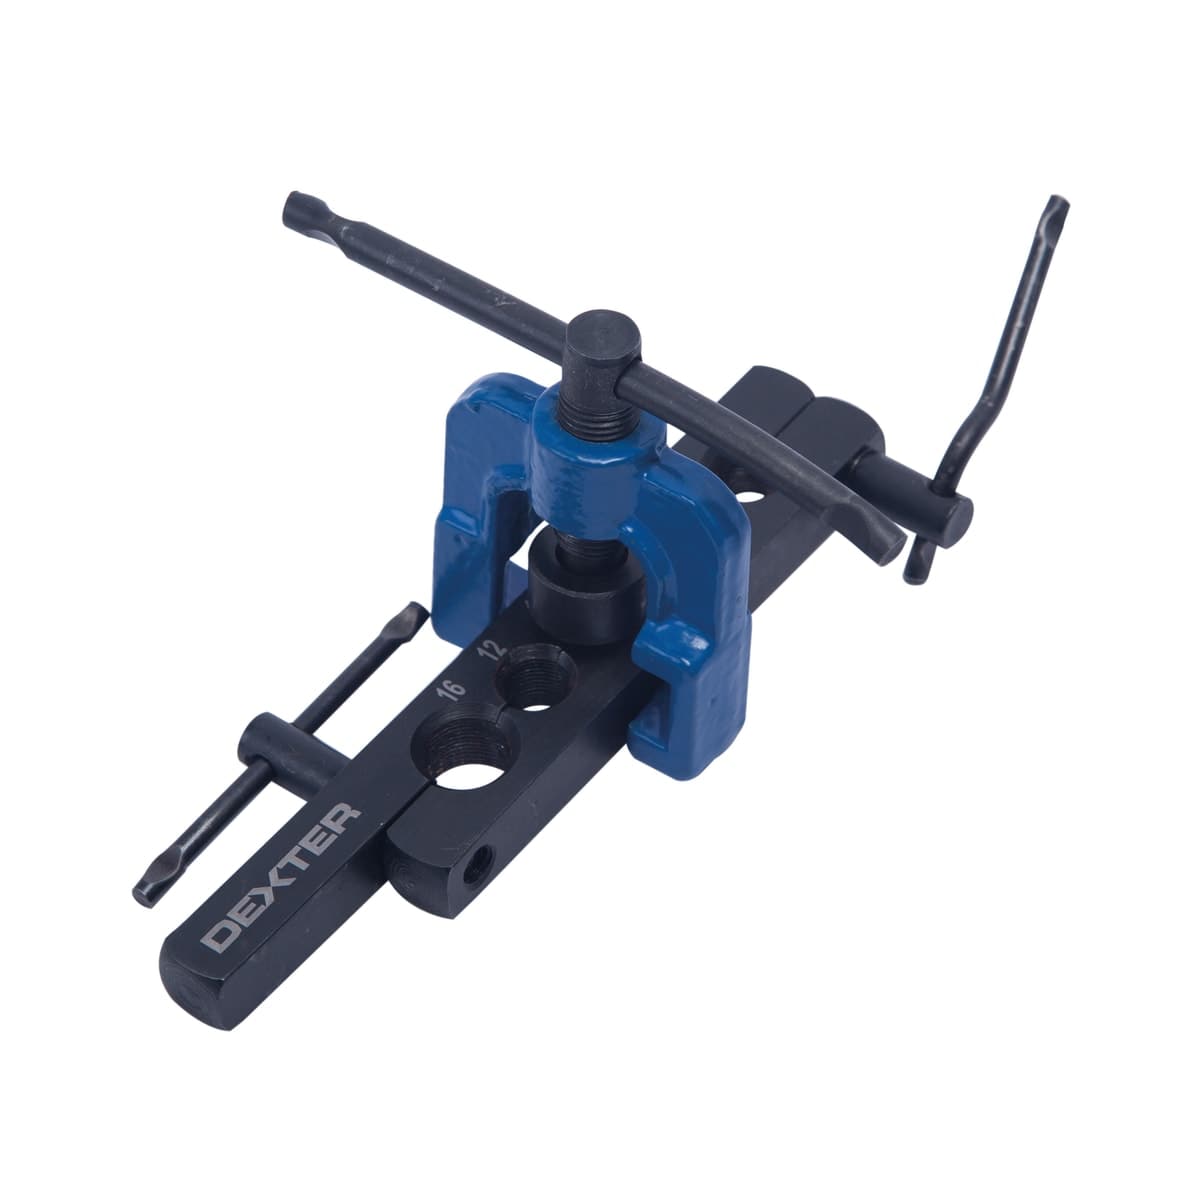 COUNTERSINK FOR COPPER PIPES - best price from Maltashopper.com BR400001756